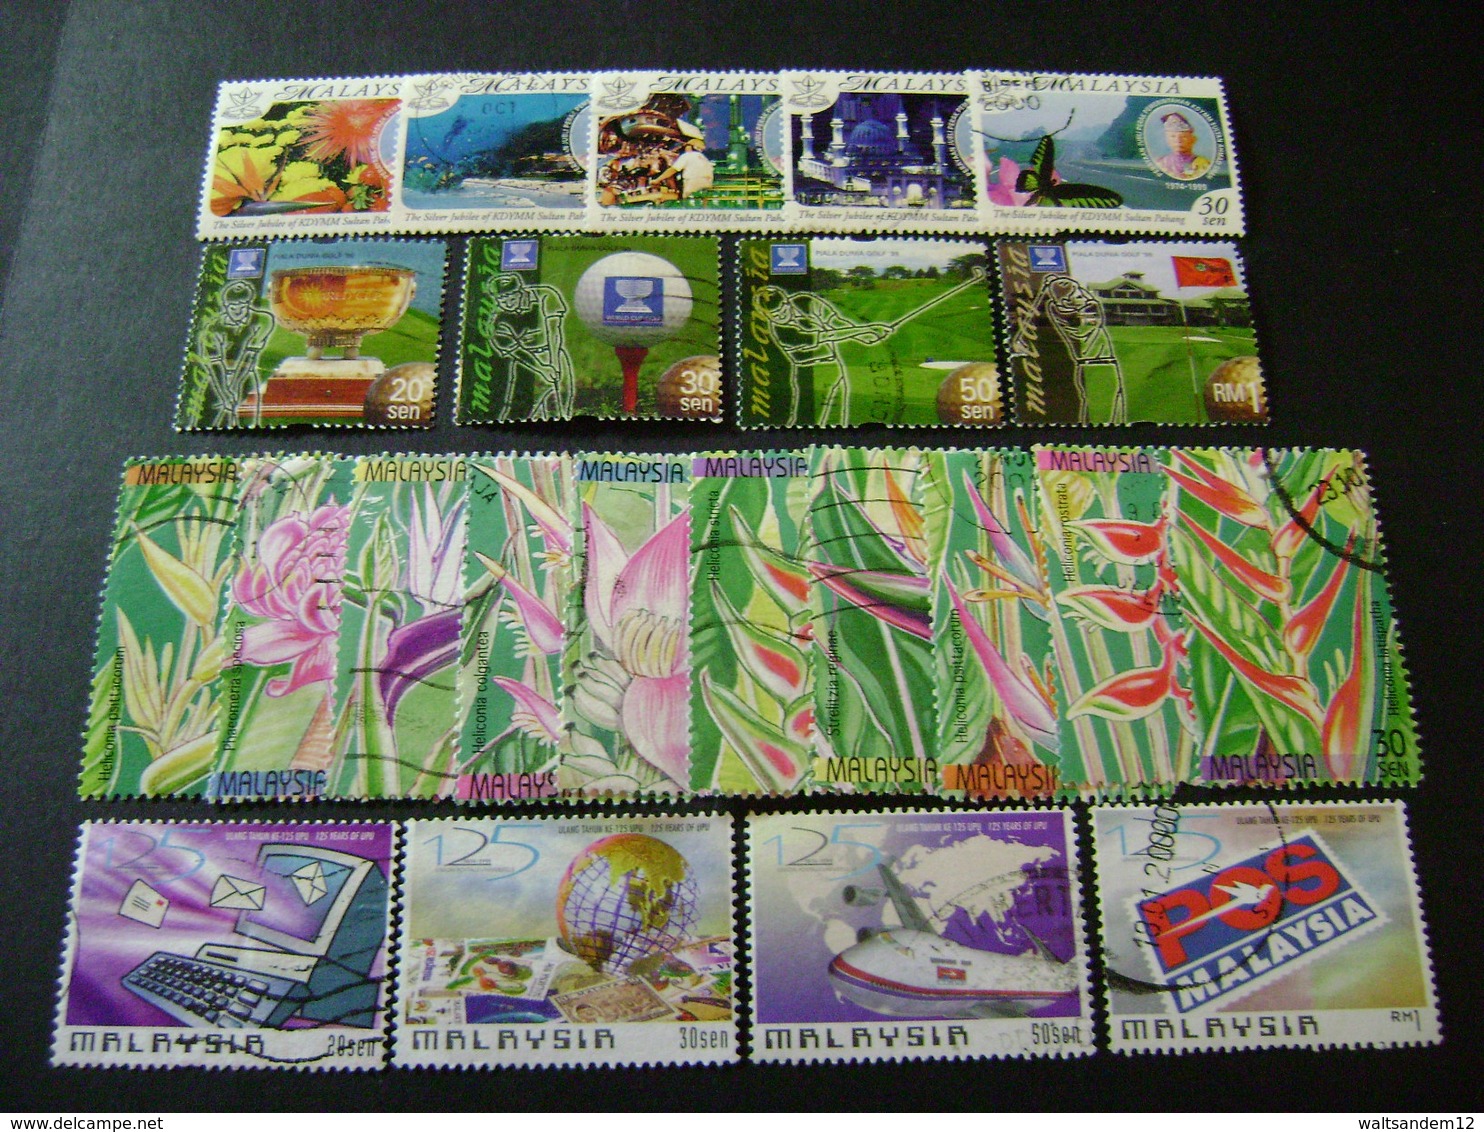 Malaysia 1999 stamp issues (between SG 717 and ms839 - see description) 7 images - Used [Sale price]